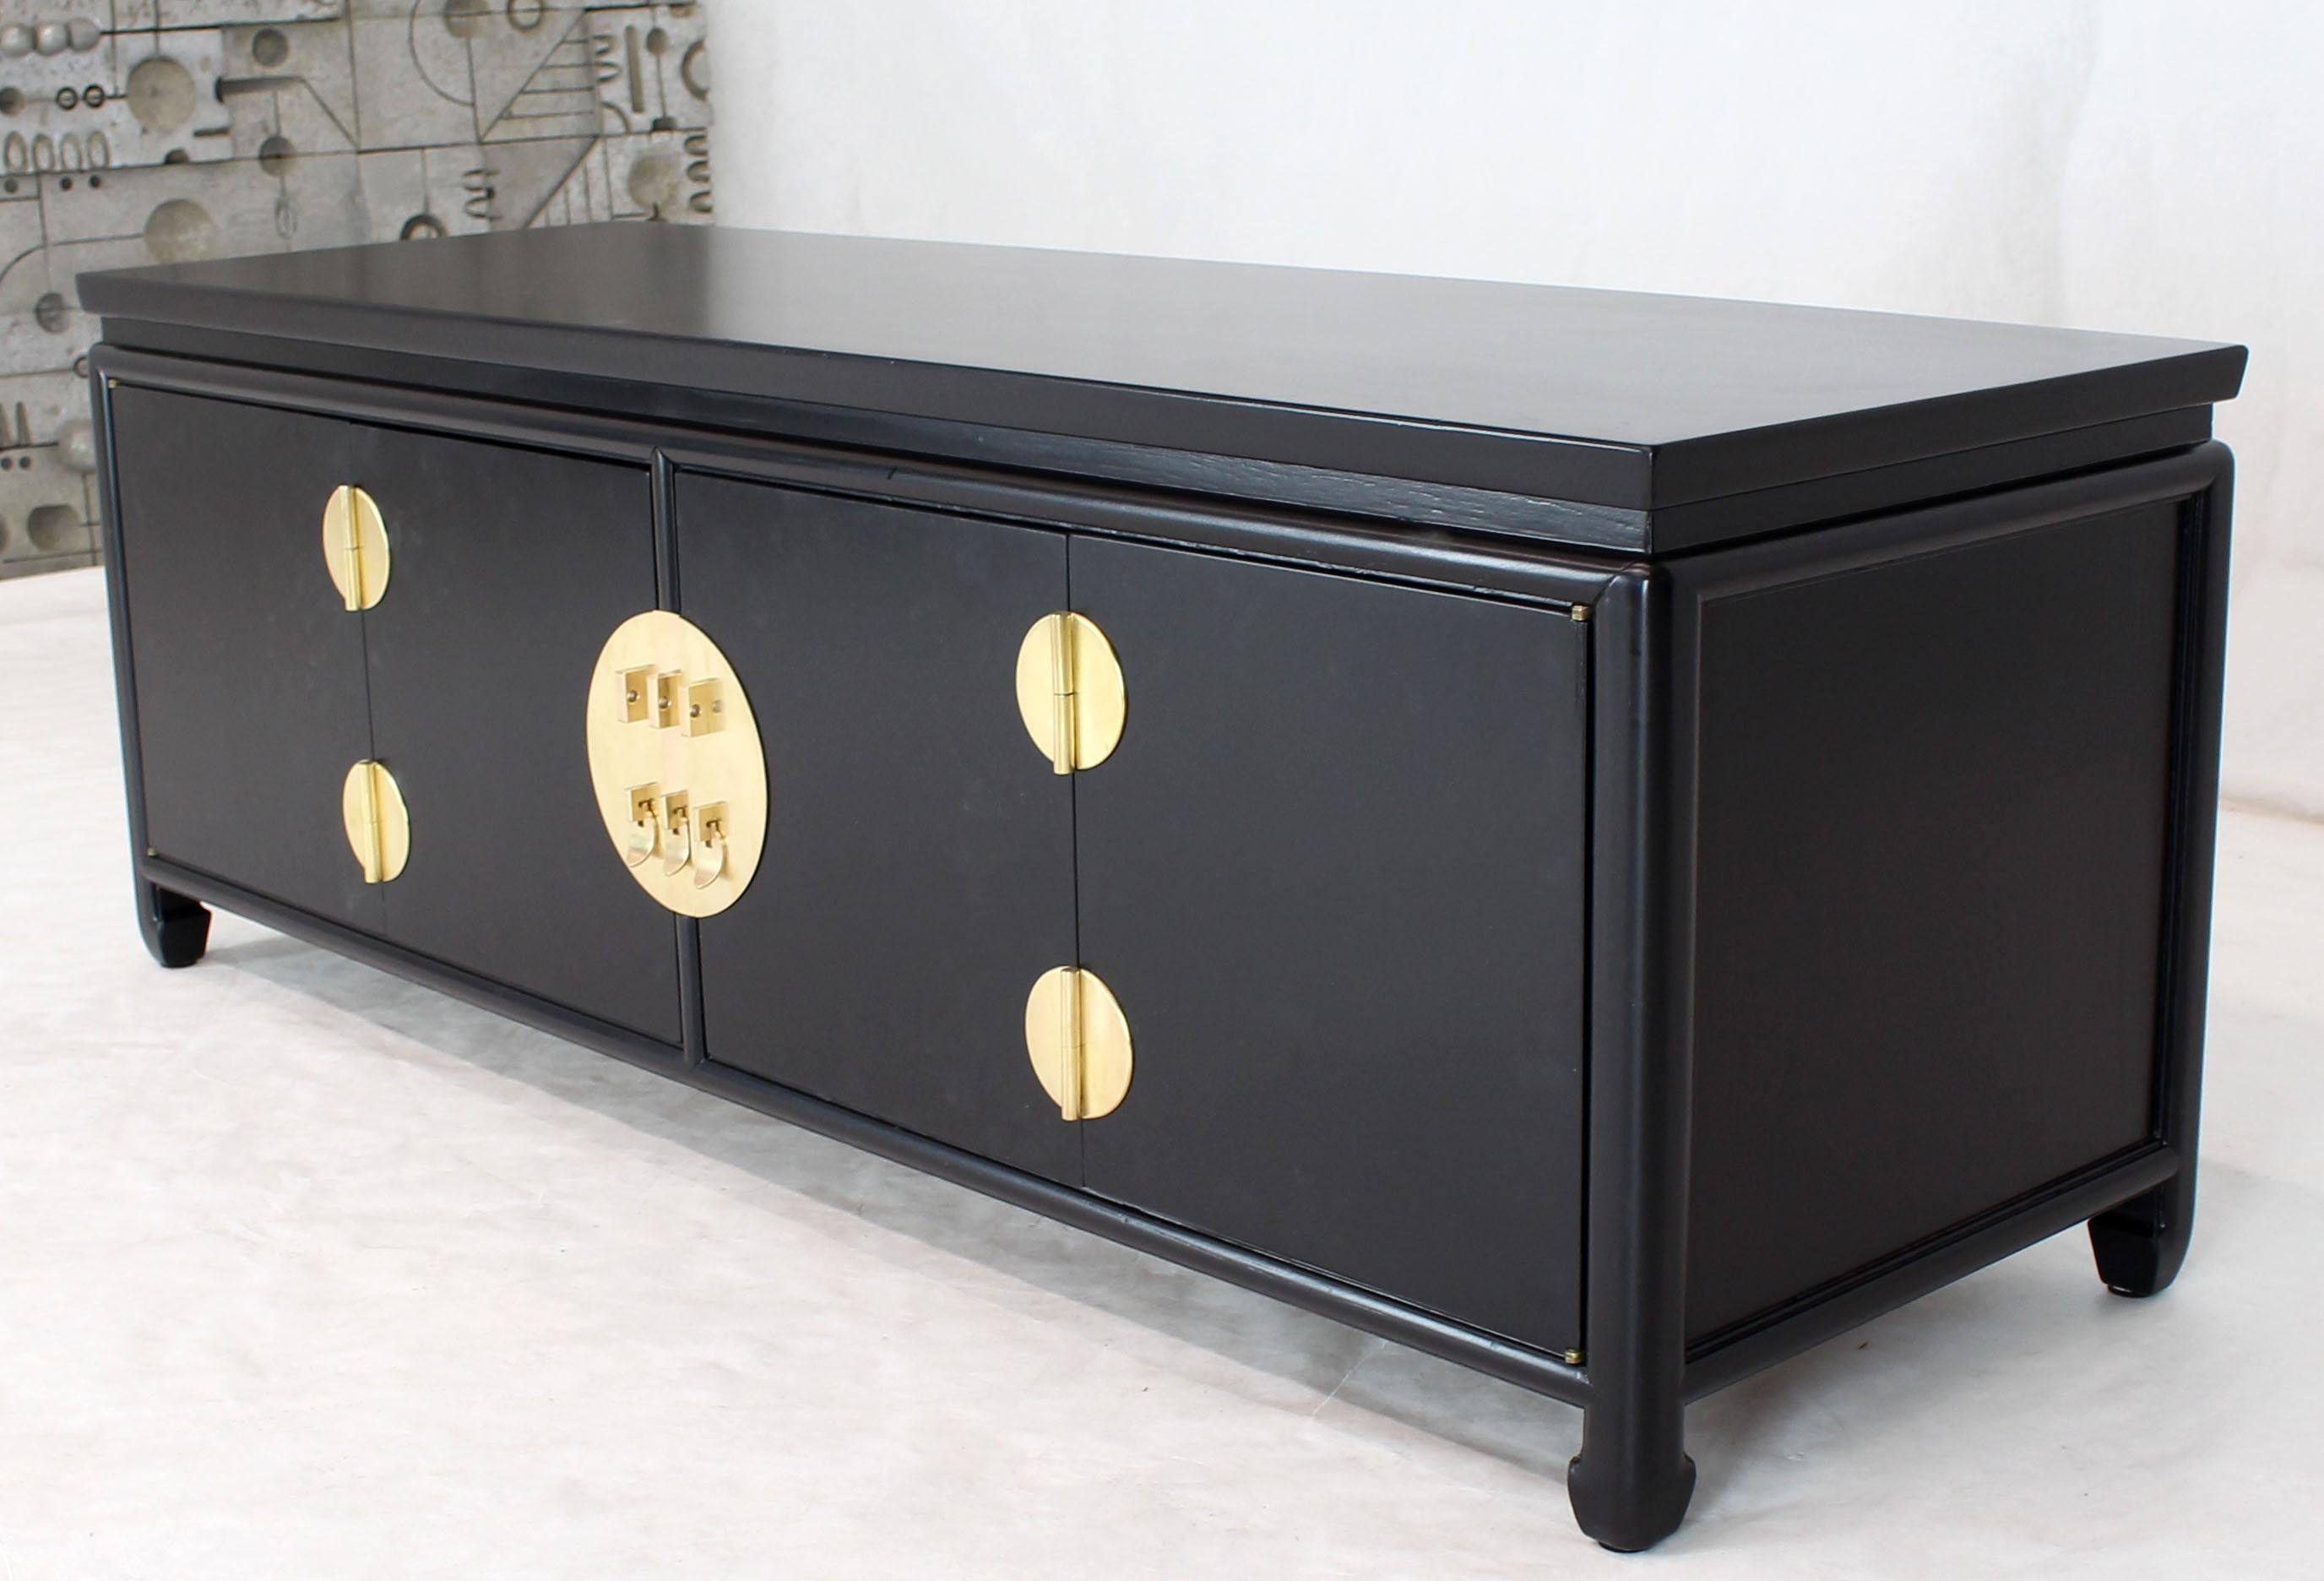 Lacquered Black Ebonized Low Petite Small Credenza Stand with Solid Brass Hardware Pulls For Sale